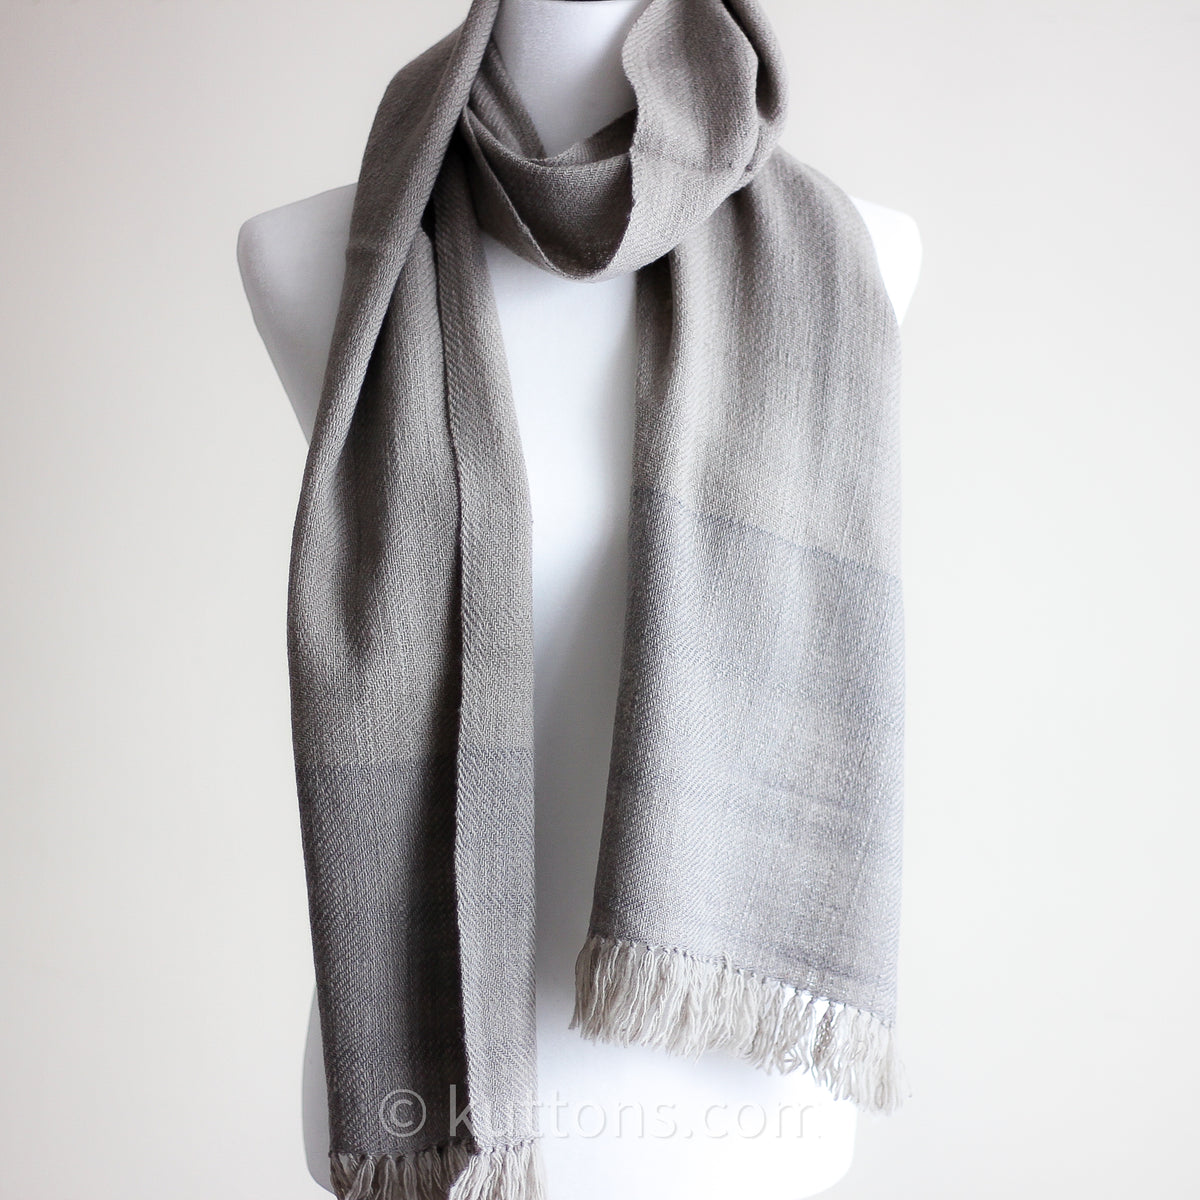 Handwoven Woolen Scarf - Naturally-Dyed with Haritaki (Harada) Herb | Gray, 12x74"